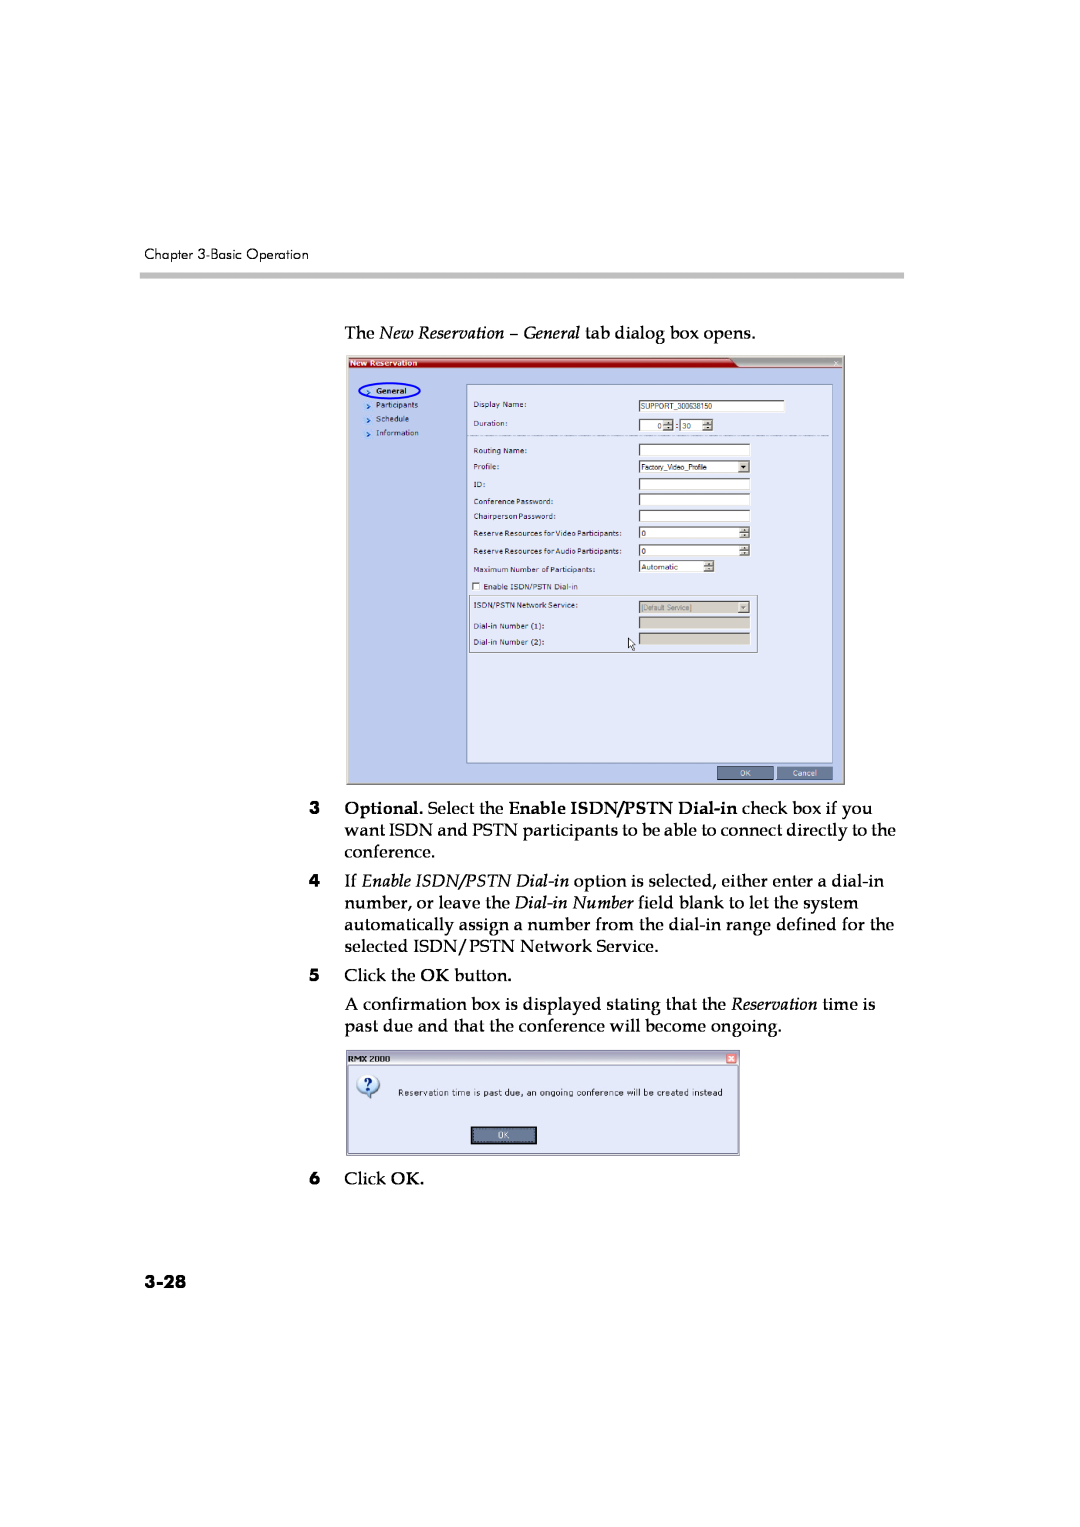 Polycom DOC2560B manual 3-28, The New Reservation - General tab dialog box opens 